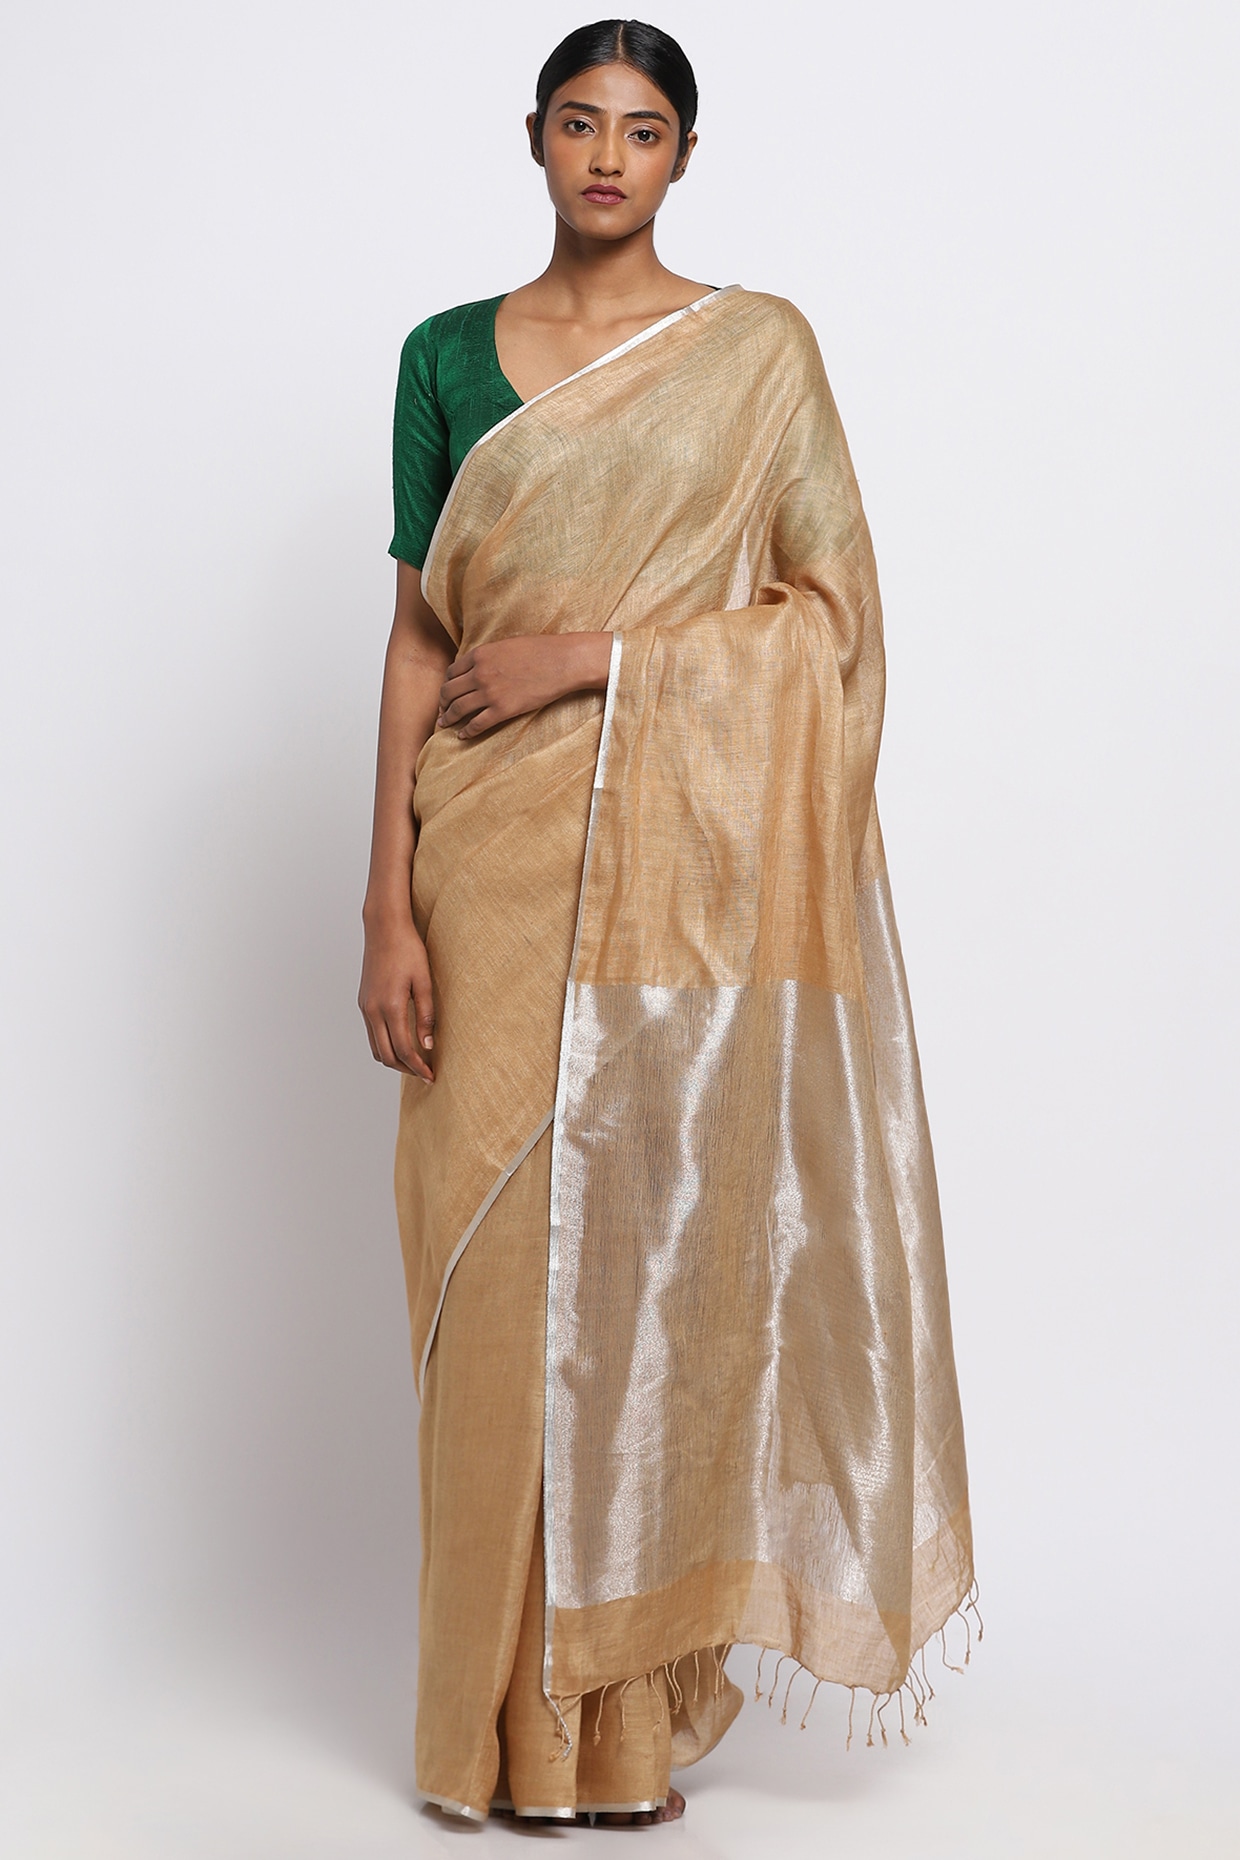 Contrast Blouse With Sequins Work Peach Saree